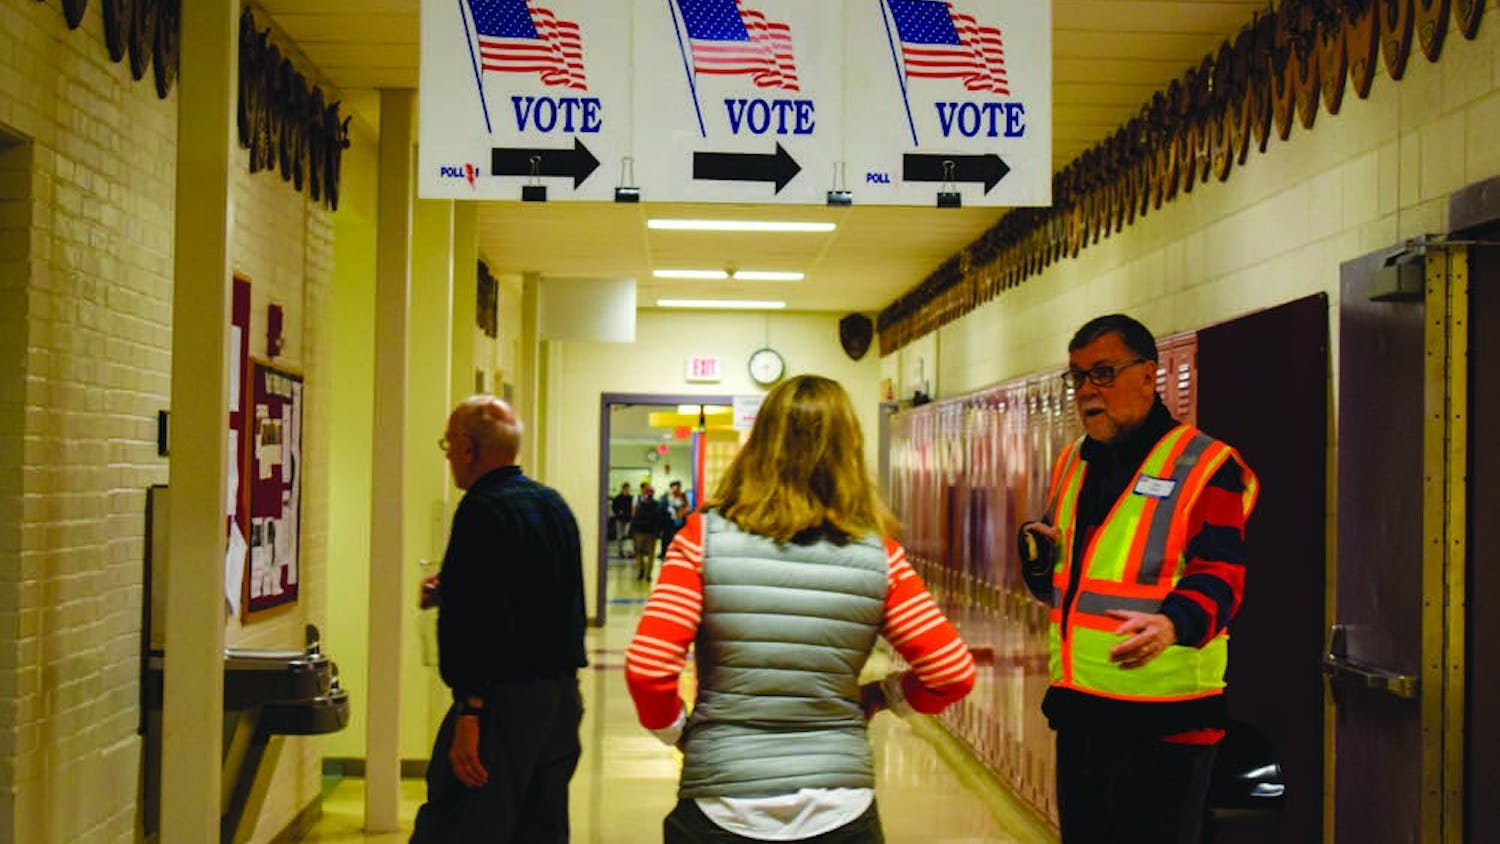 Hanover High School is the designated voting place in Hanover, NH.&nbsp;